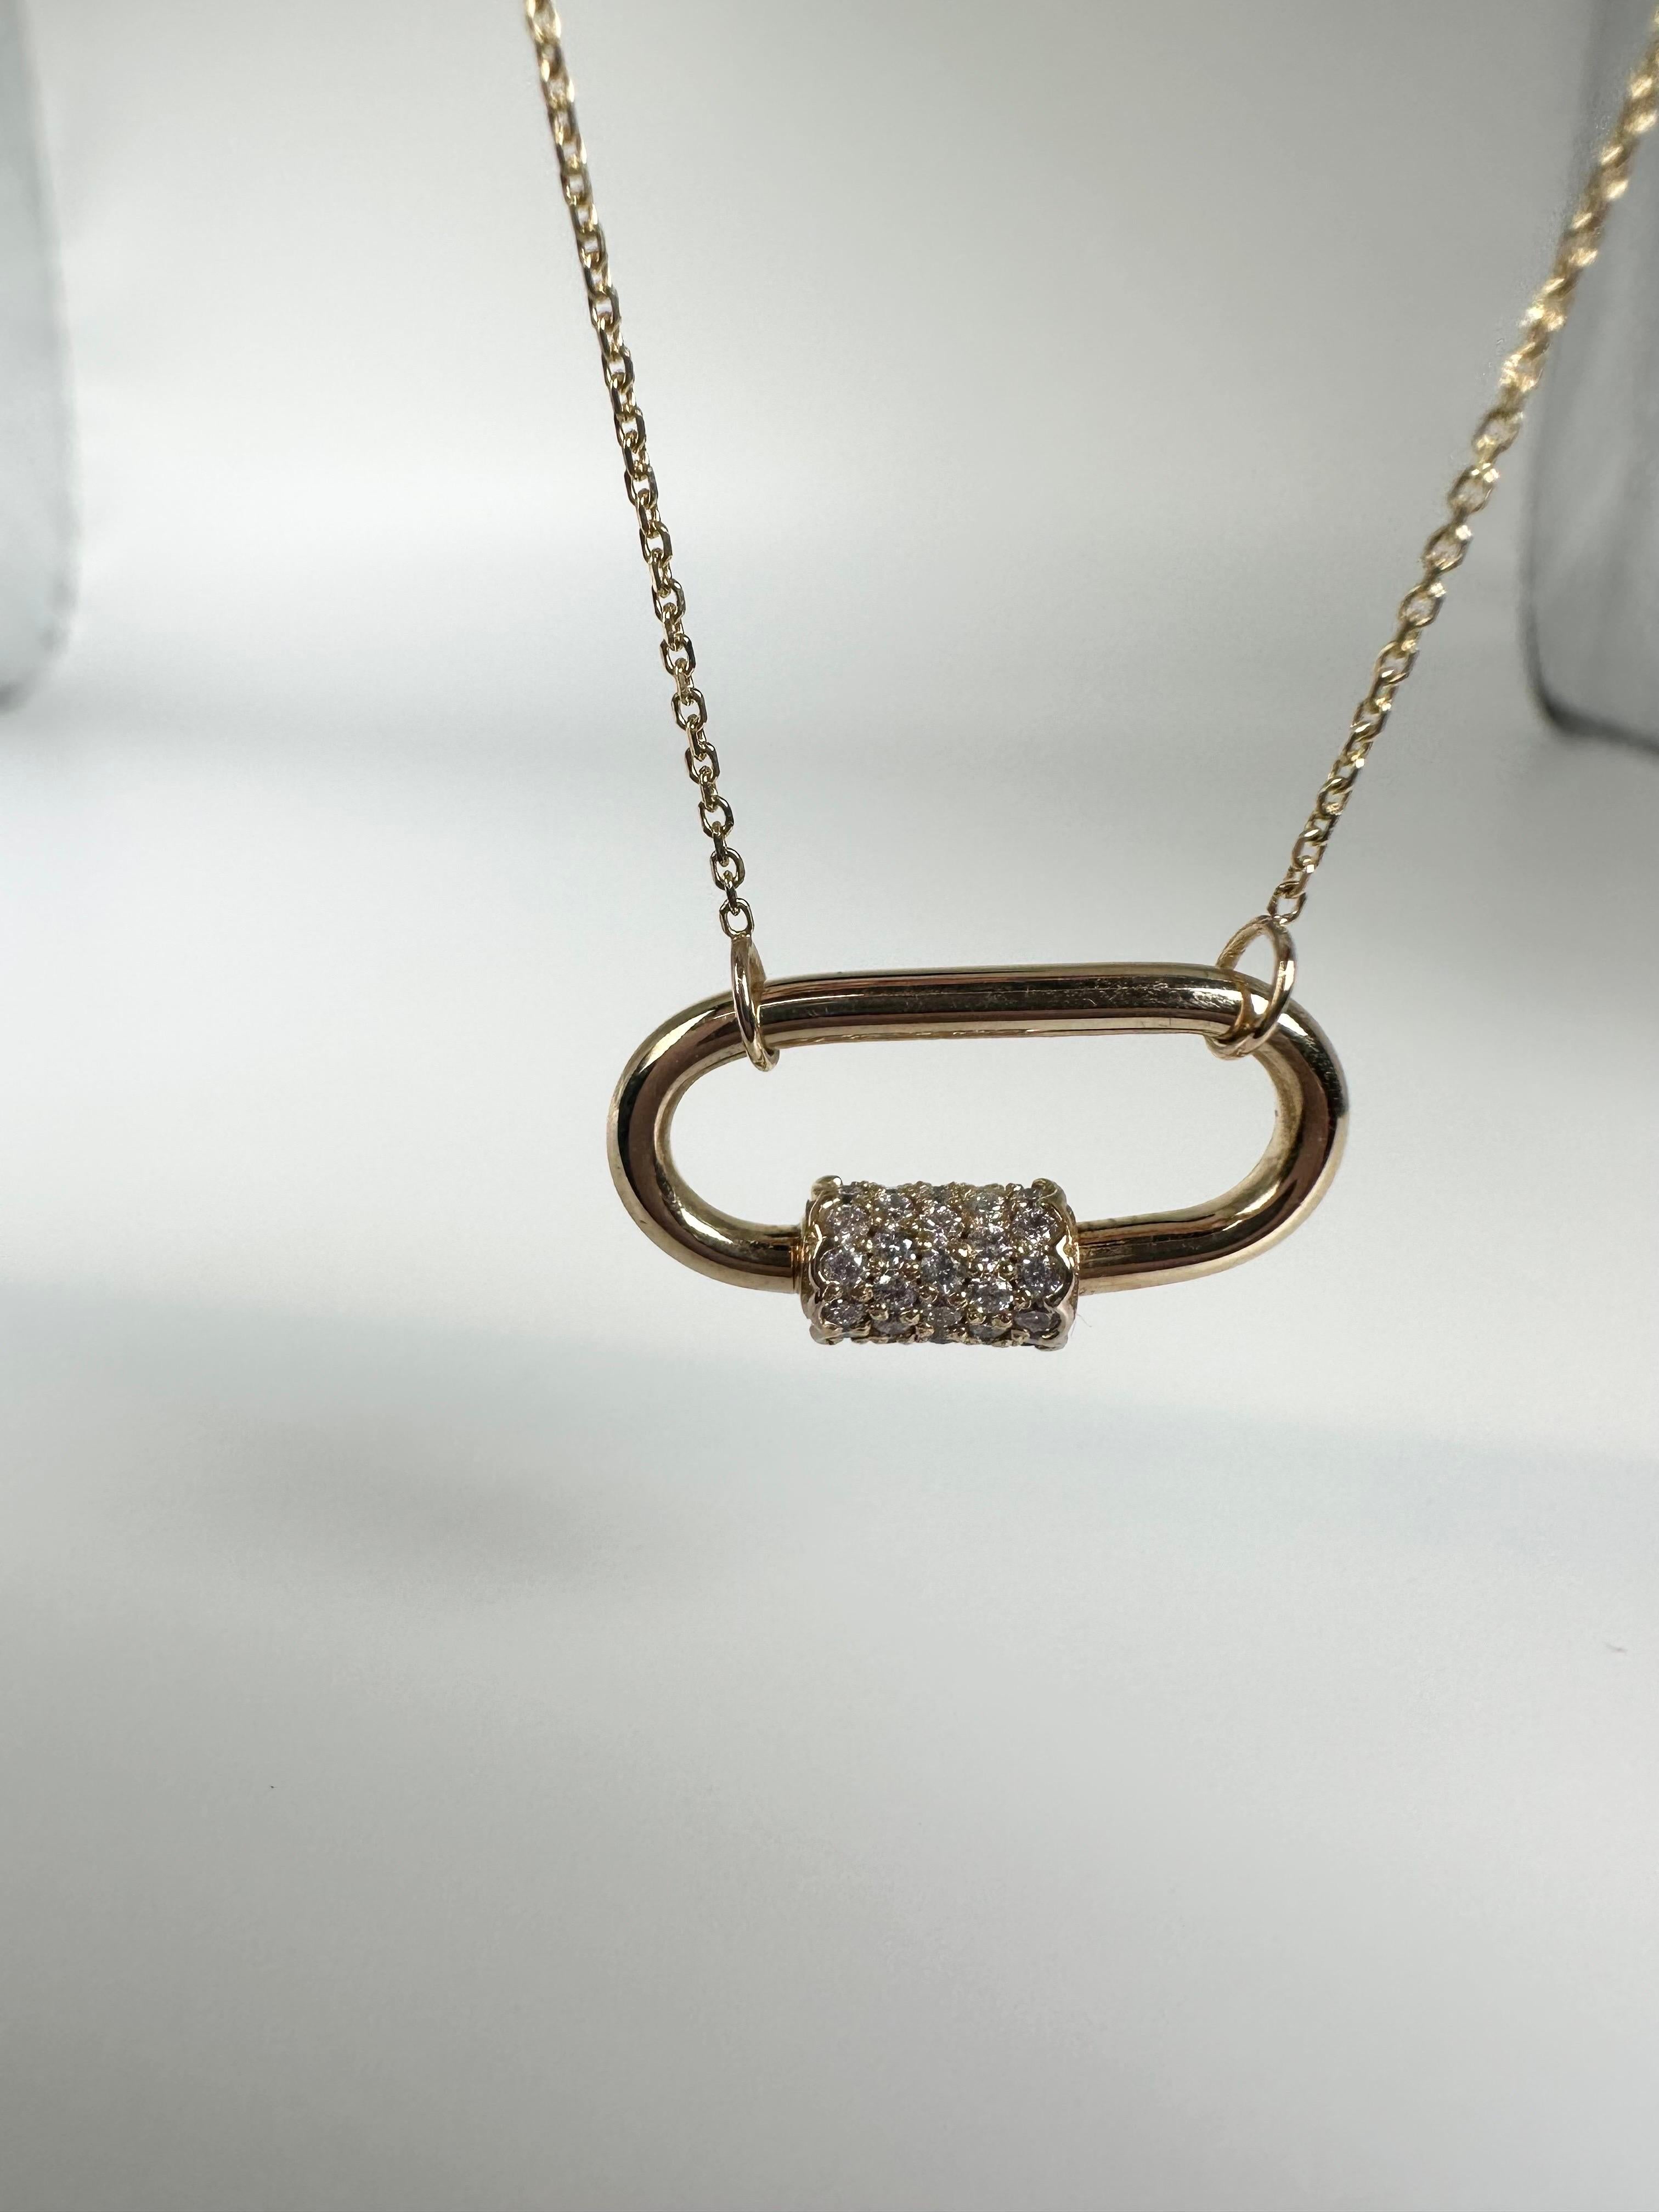 Diamond pendant necklace modern 14KT gold movable pendant In New Condition For Sale In Jupiter, FL